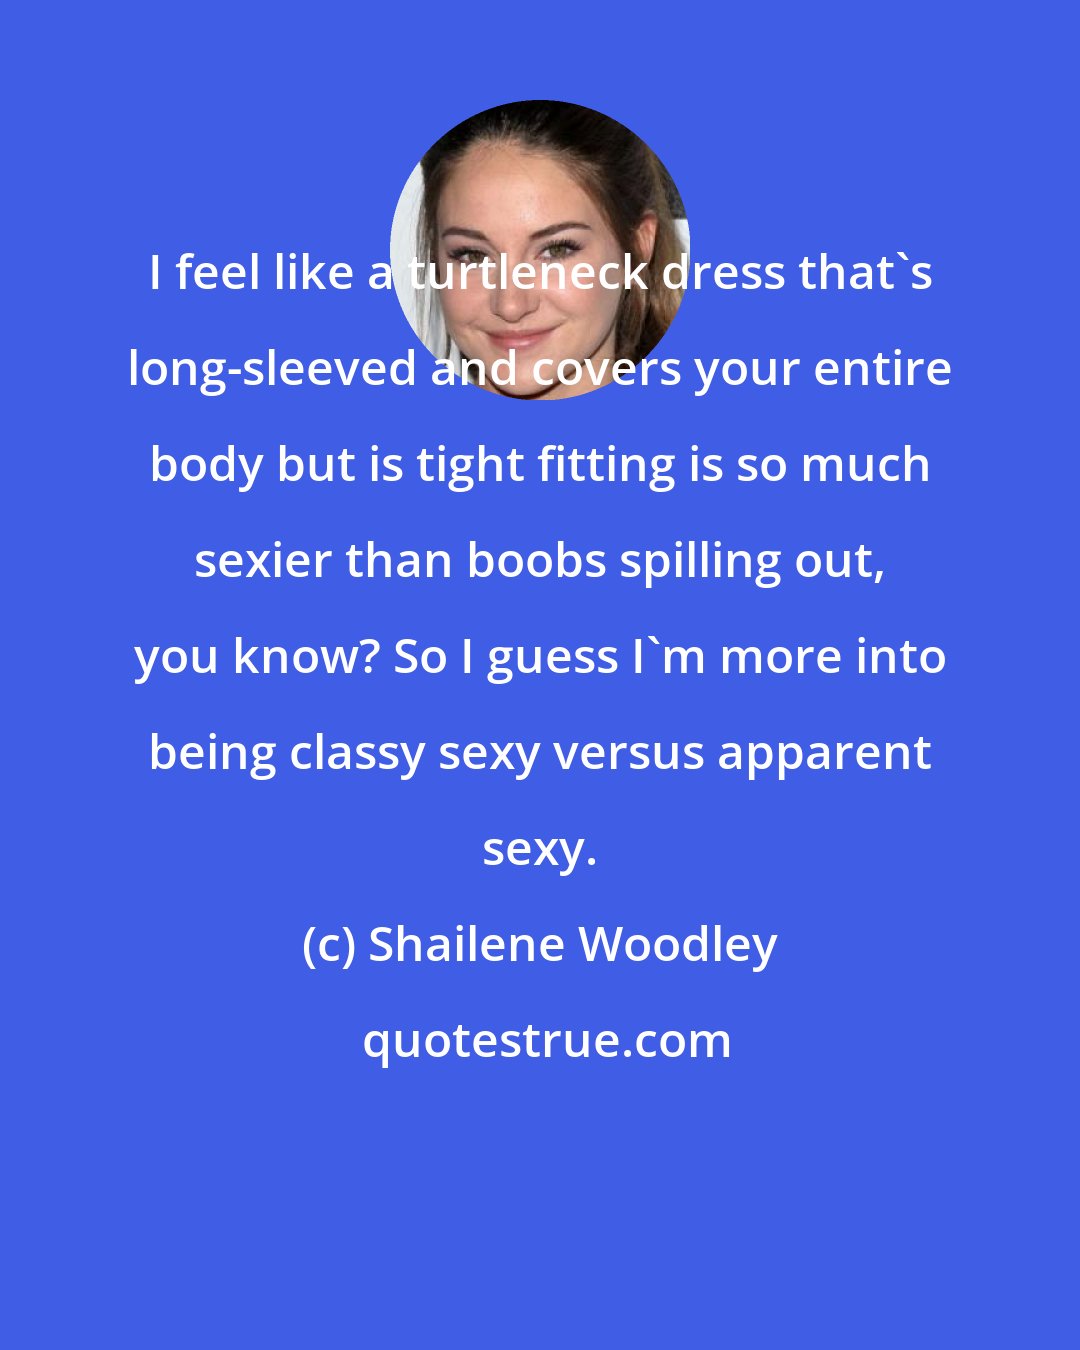 Shailene Woodley: I feel like a turtleneck dress that's long-sleeved and covers your entire body but is tight fitting is so much sexier than boobs spilling out, you know? So I guess I'm more into being classy sexy versus apparent sexy.